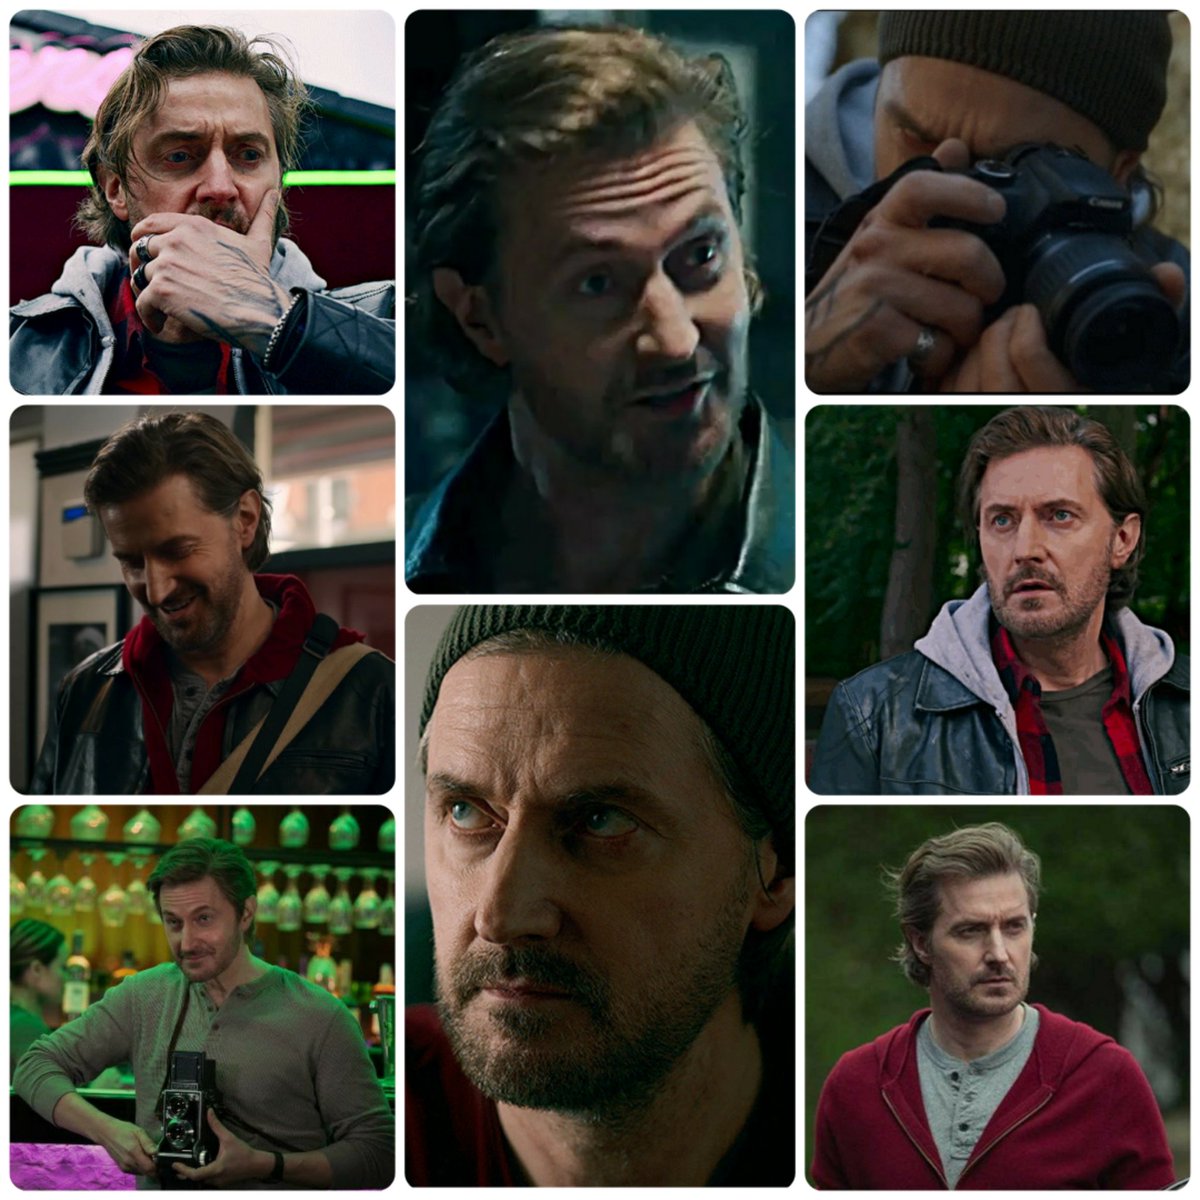 OTD in 2021, #StayClose, a miniseries starring #RichardArmitage as photojournalist Ray Levine, debuted on #Netflix. Adapted from the #HarlanCoben novel of the same name, it was the 2nd collaboration btw star and author and was rated among the top Netflix original series that yr.